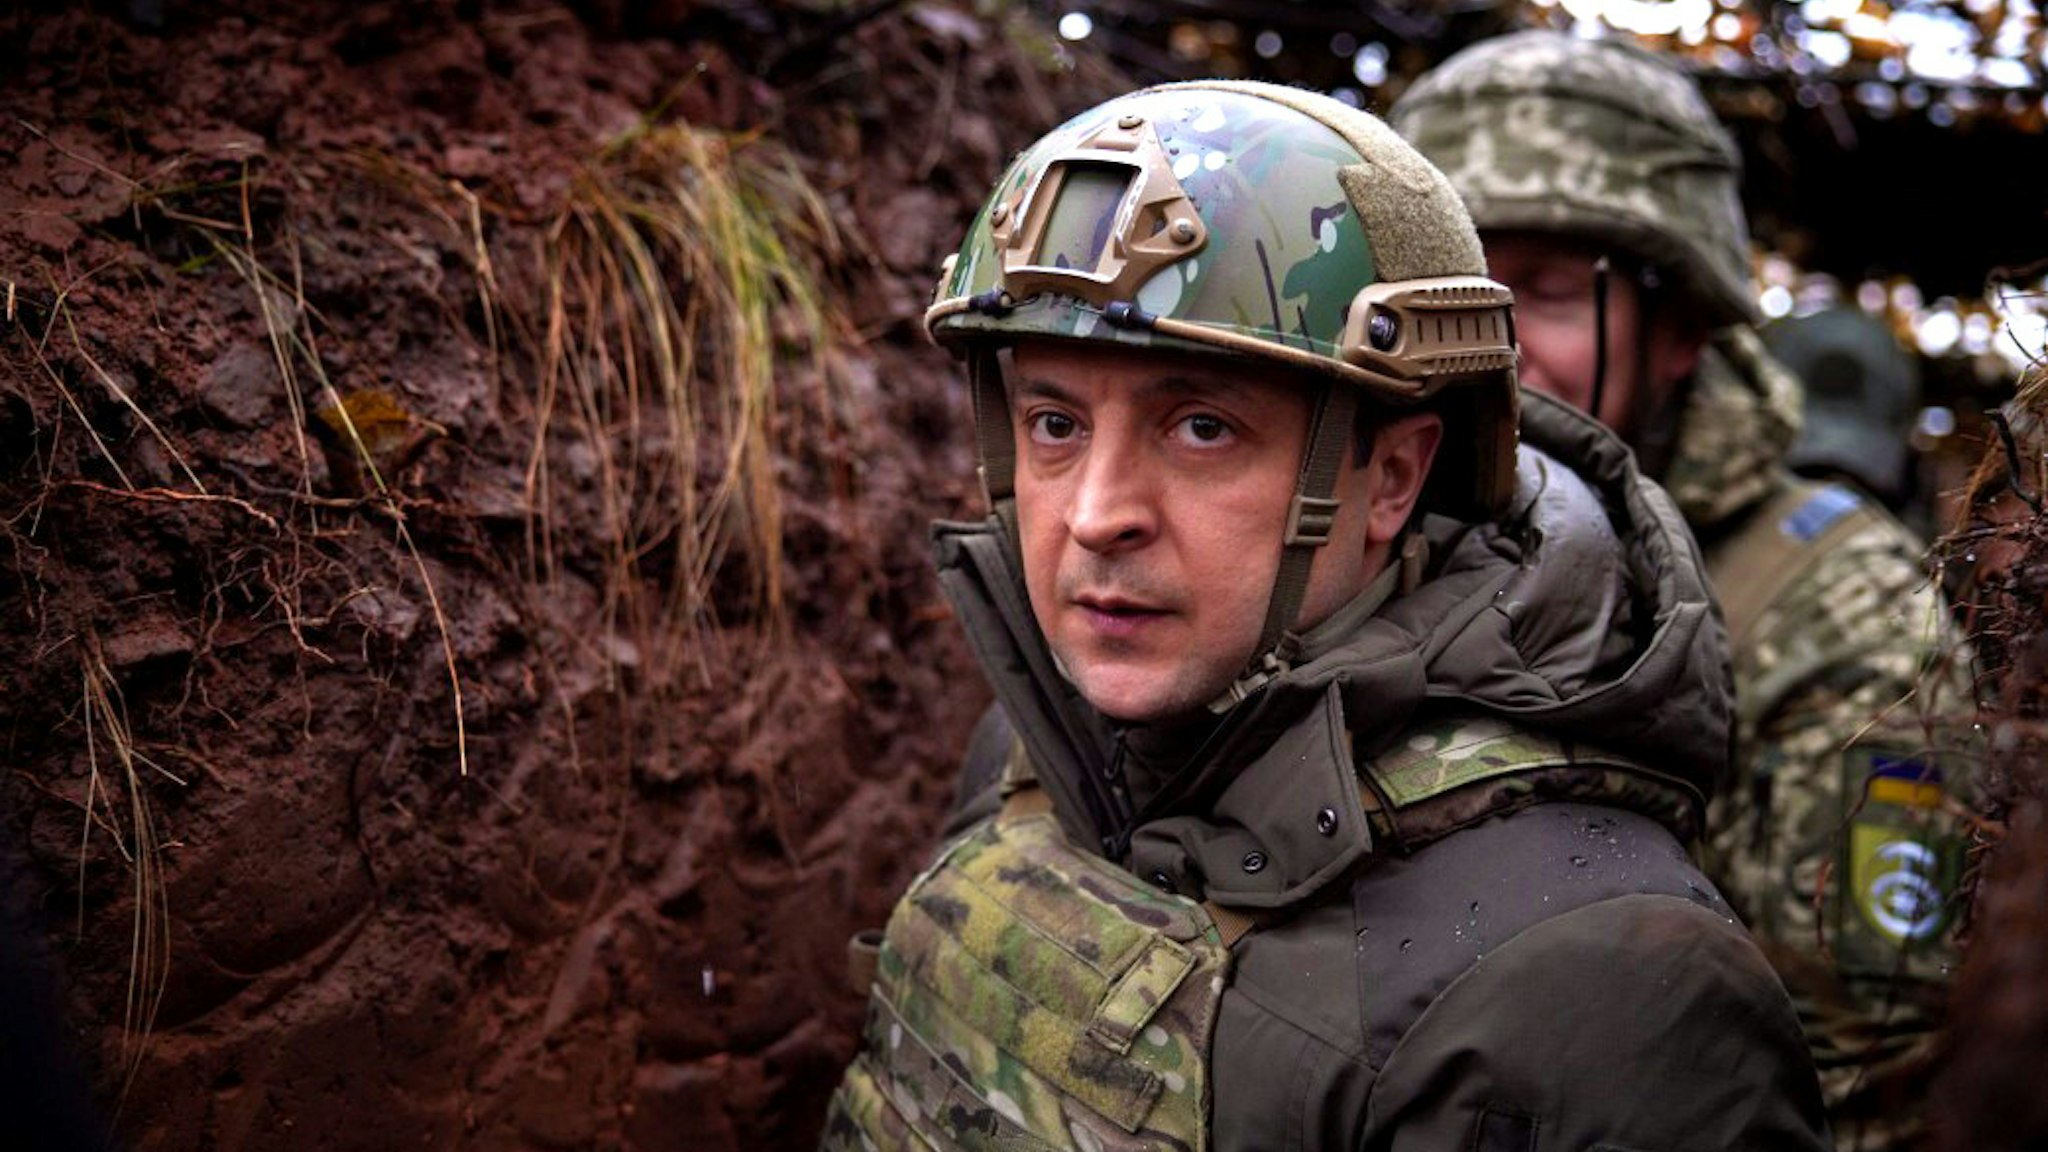 DONBASS, UKRAINE - DECEMBER 06: (----EDITORIAL USE ONLY â MANDATORY CREDIT - "UKRAINIAN PRESIDENCY / HANDOUT" - NO MARKETING NO ADVERTISING CAMPAIGNS - DISTRIBUTED AS A SERVICE TO CLIENTS----) Ukrainian President Volodymyr Zelensky visits the front-line positions of Ukrainian military in Donbass, Ukraine on December 06, 2021.